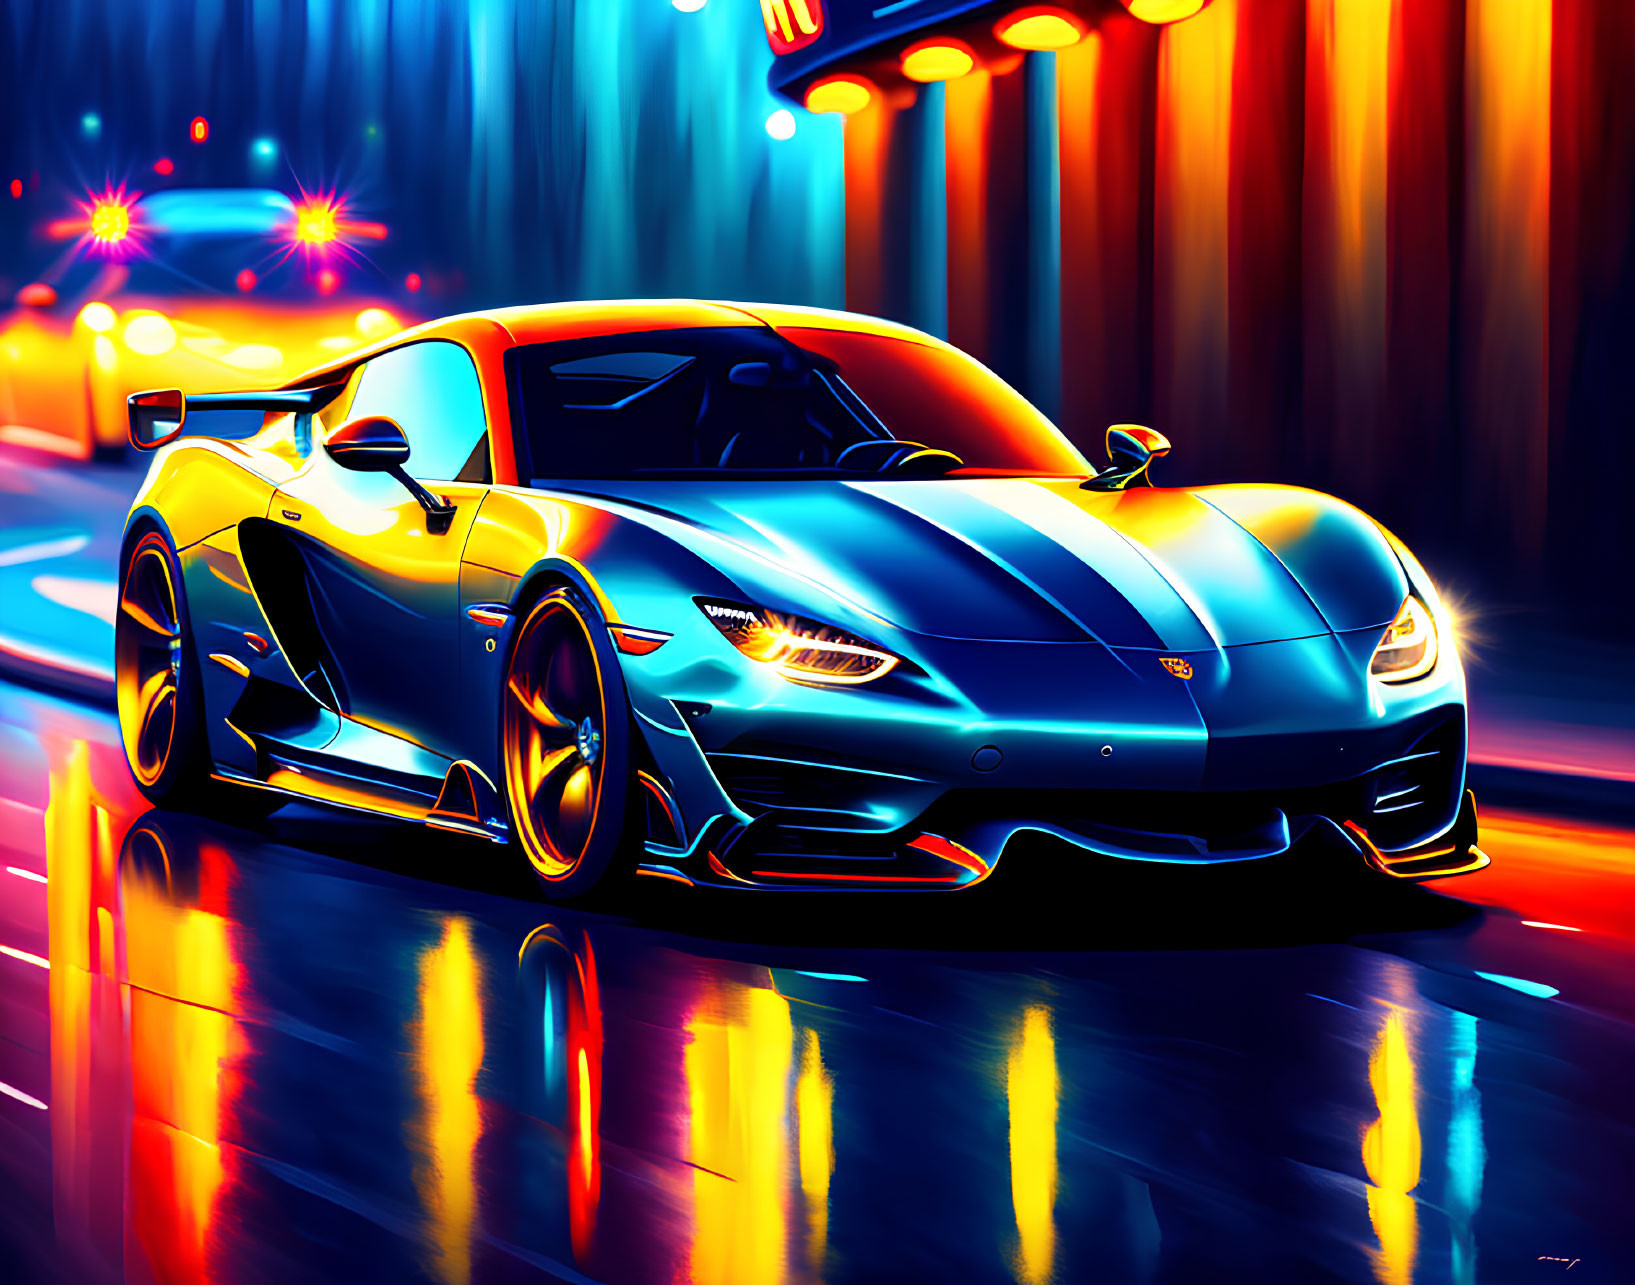 Colorful digital artwork: Blue sports car with neon reflections and city lights backdrop